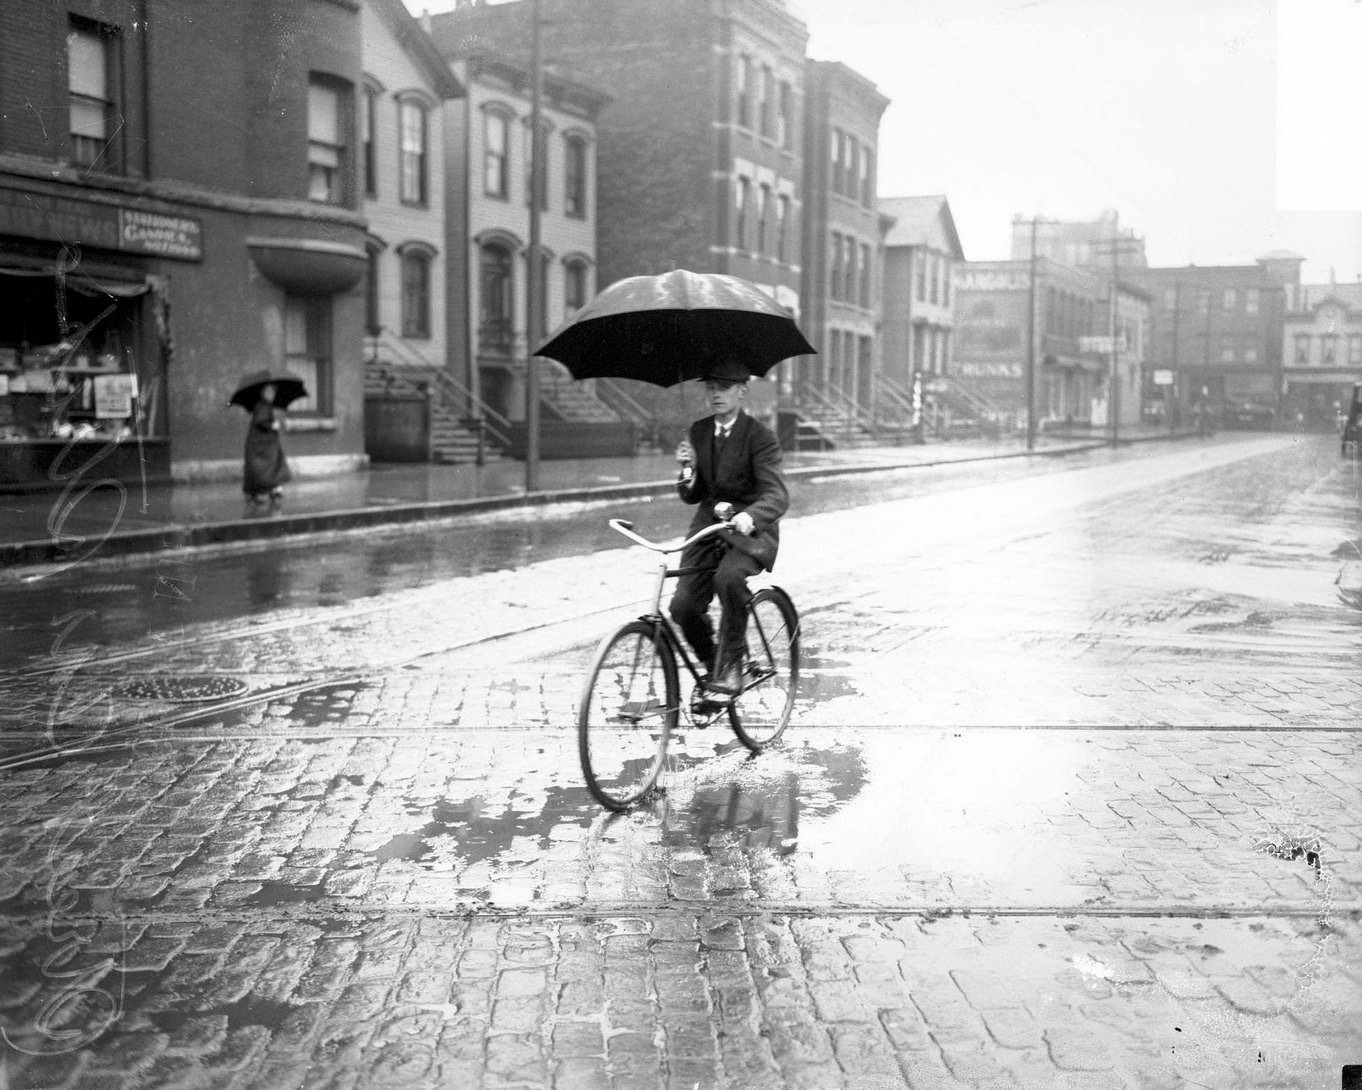 Man holding an umbrella and riding a bicycle in the rain on an empty street, with visible streetcar tracks, during a streetcar strike, Chicago, Illinois, June 15, 1915.